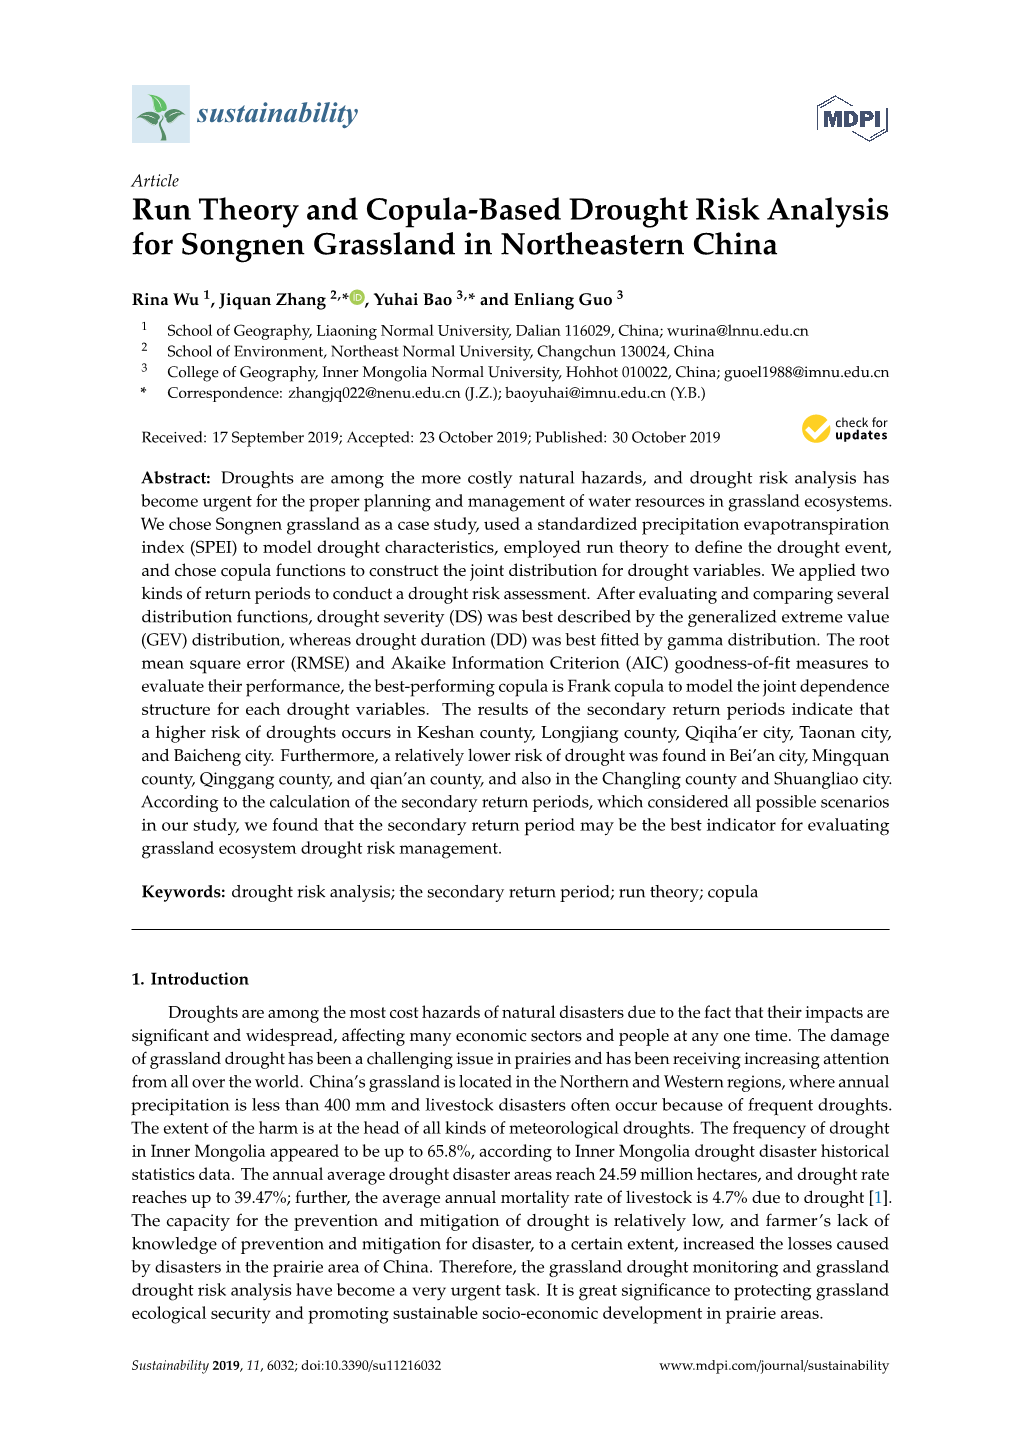 Run Theory and Copula-Based Drought Risk Analysis for Songnen Grassland in Northeastern China